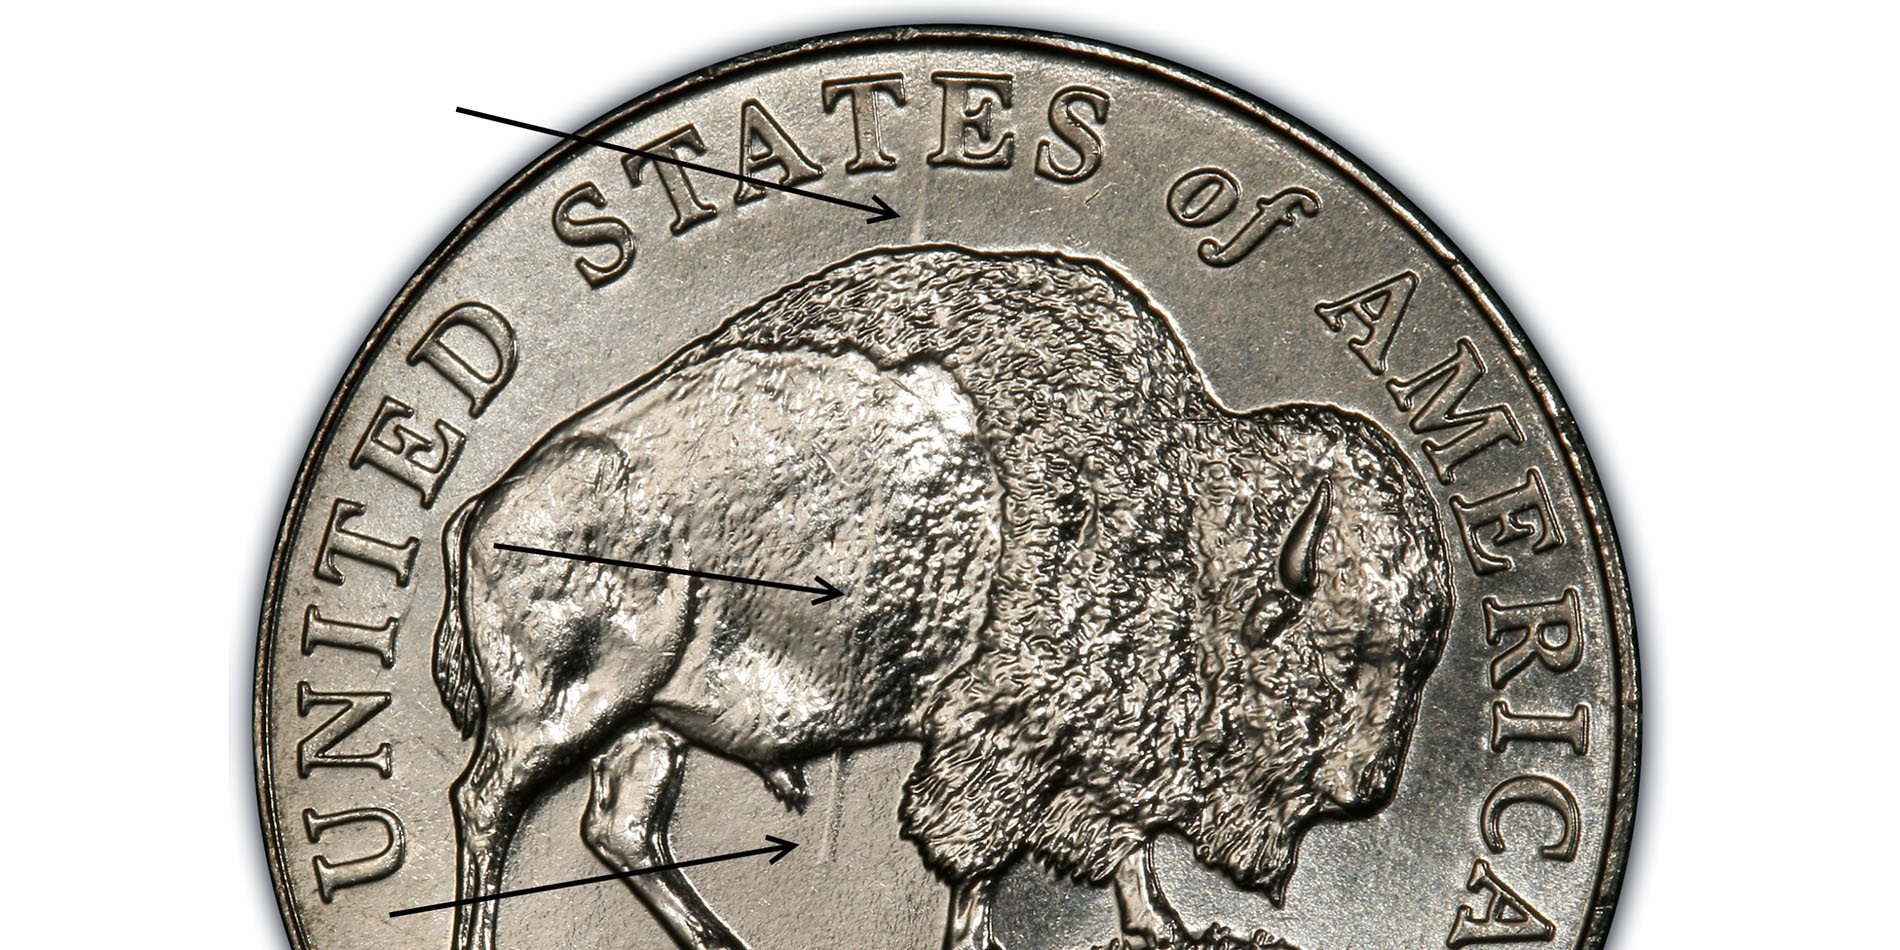 How Did the 2005-D Speared Bison Nickel Come to Be?